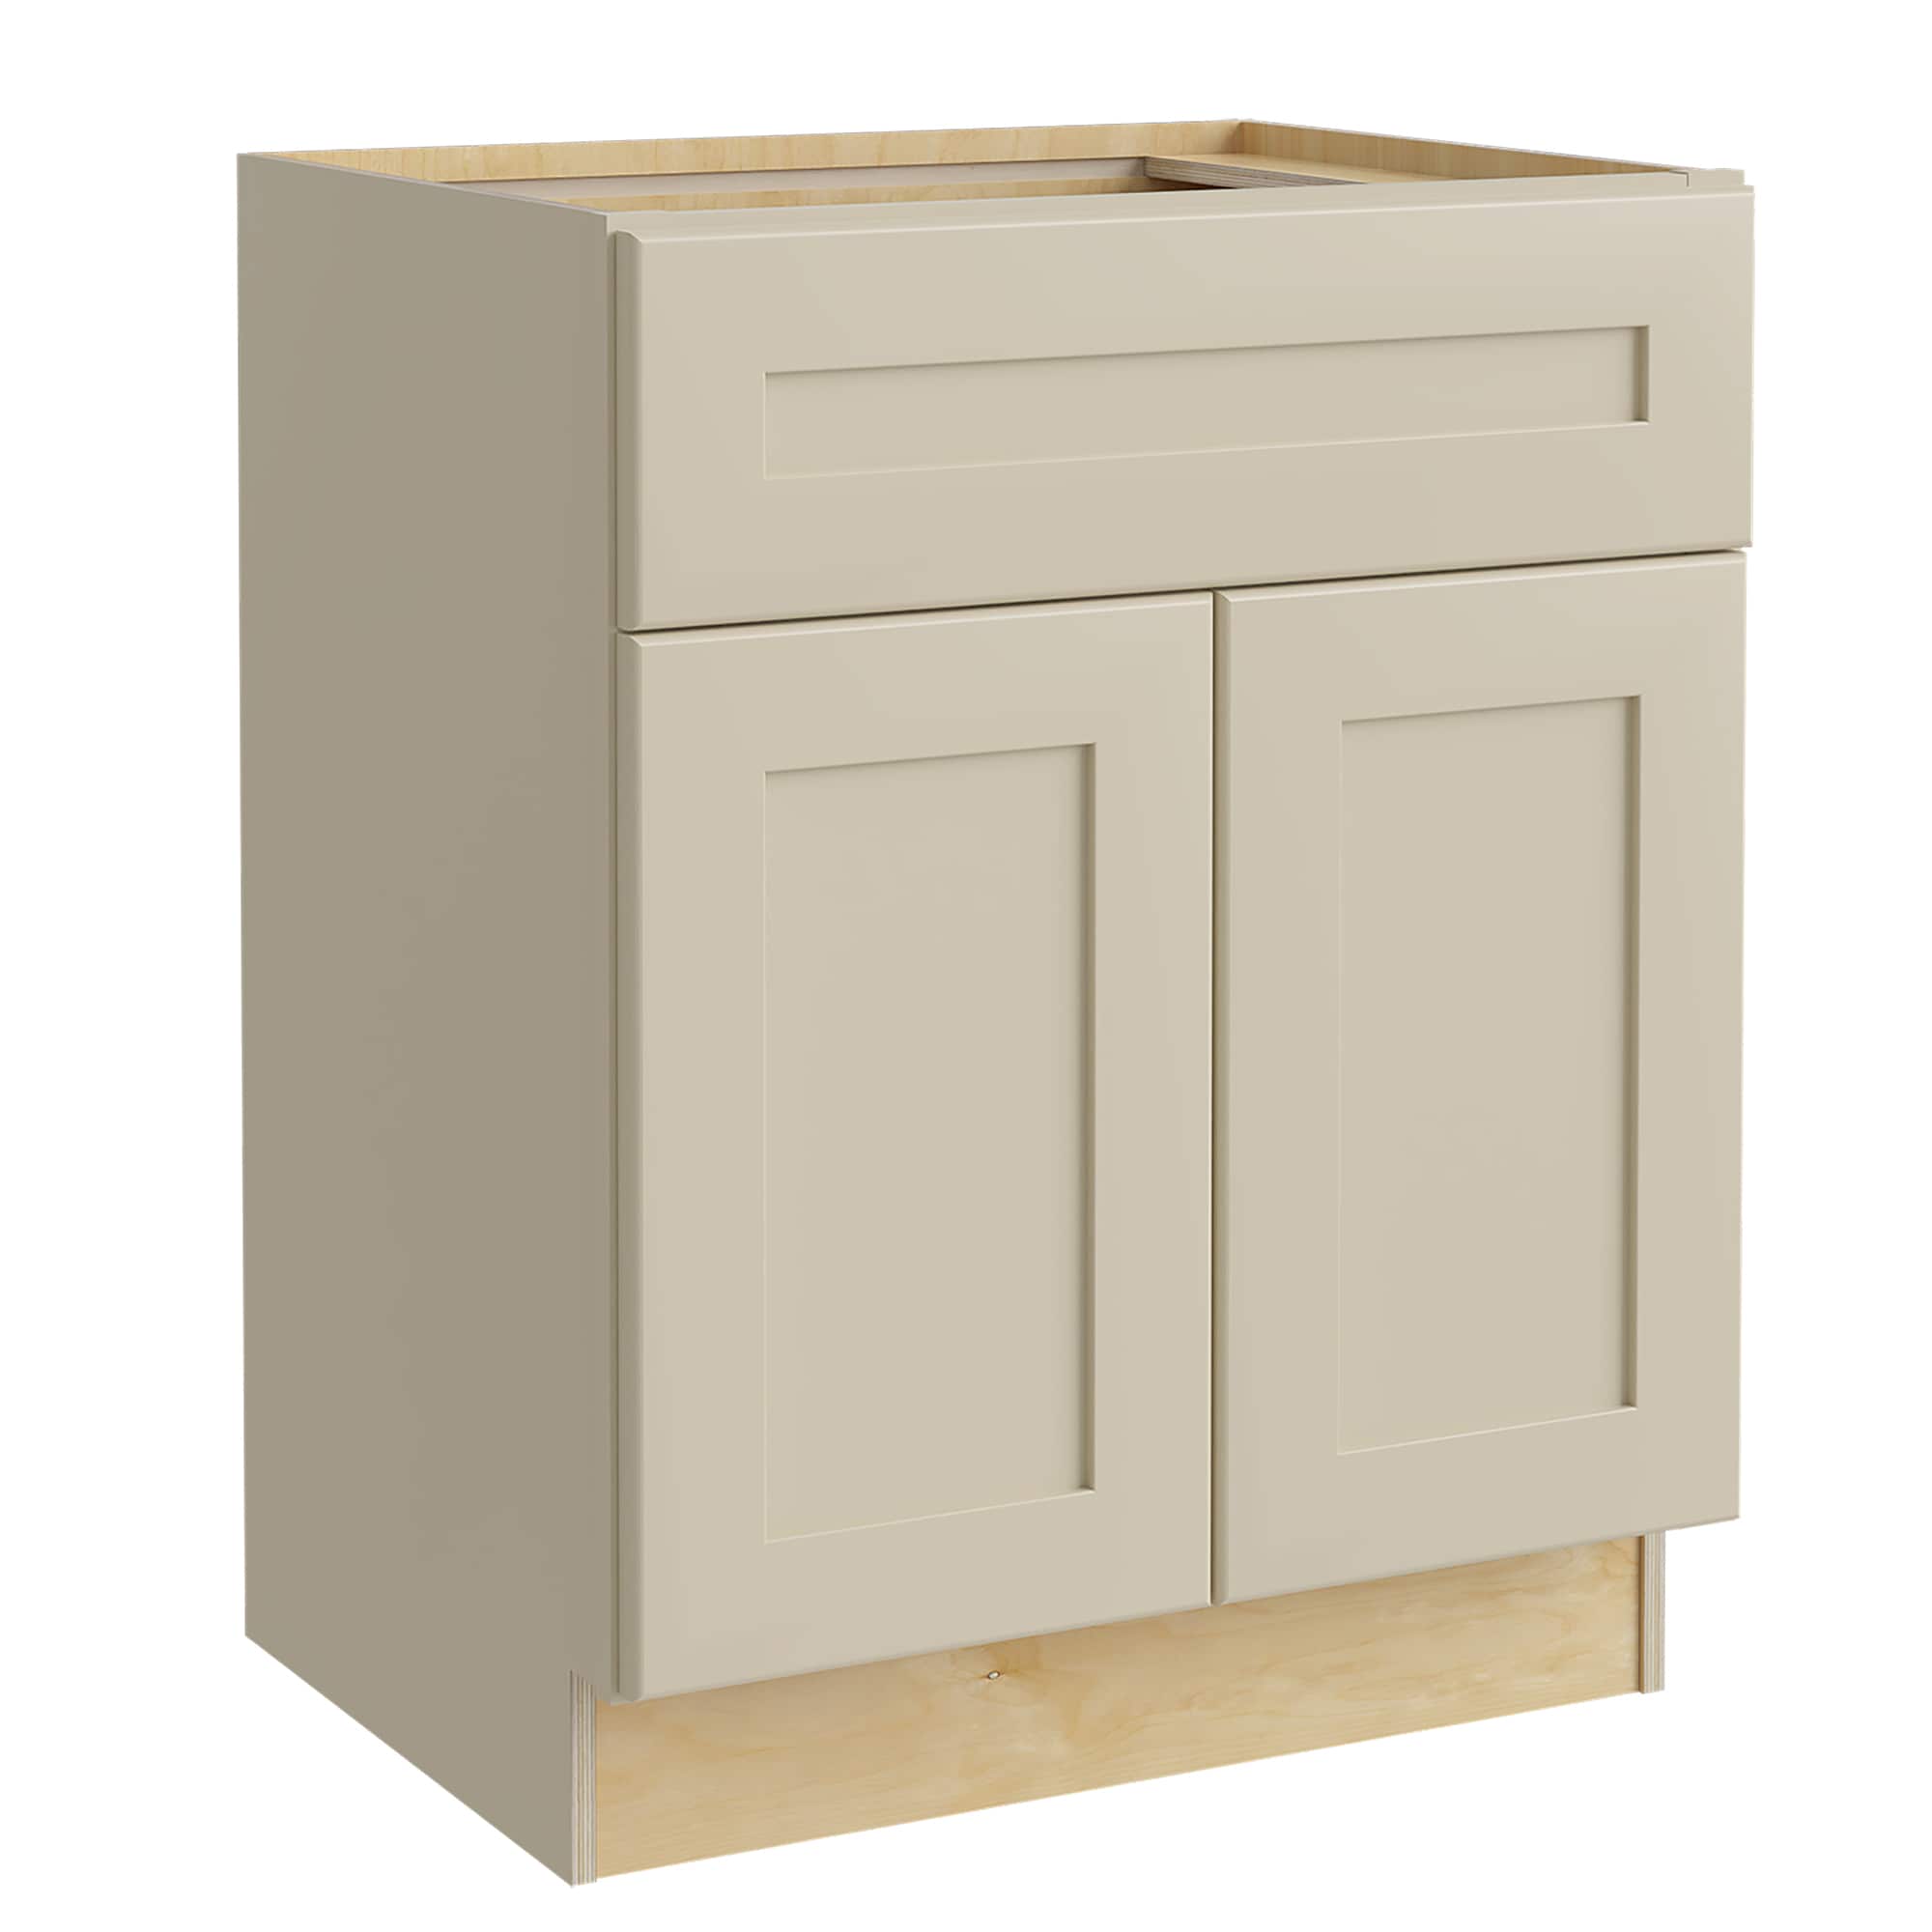 Luxxe Cabinetry 30-in W x 34.5-in H x 21-in D Norfolk Blended Cream Painted Sink Base Fully Assembled Semi-custom Cabinet in Off-White | VSB3021-NBC